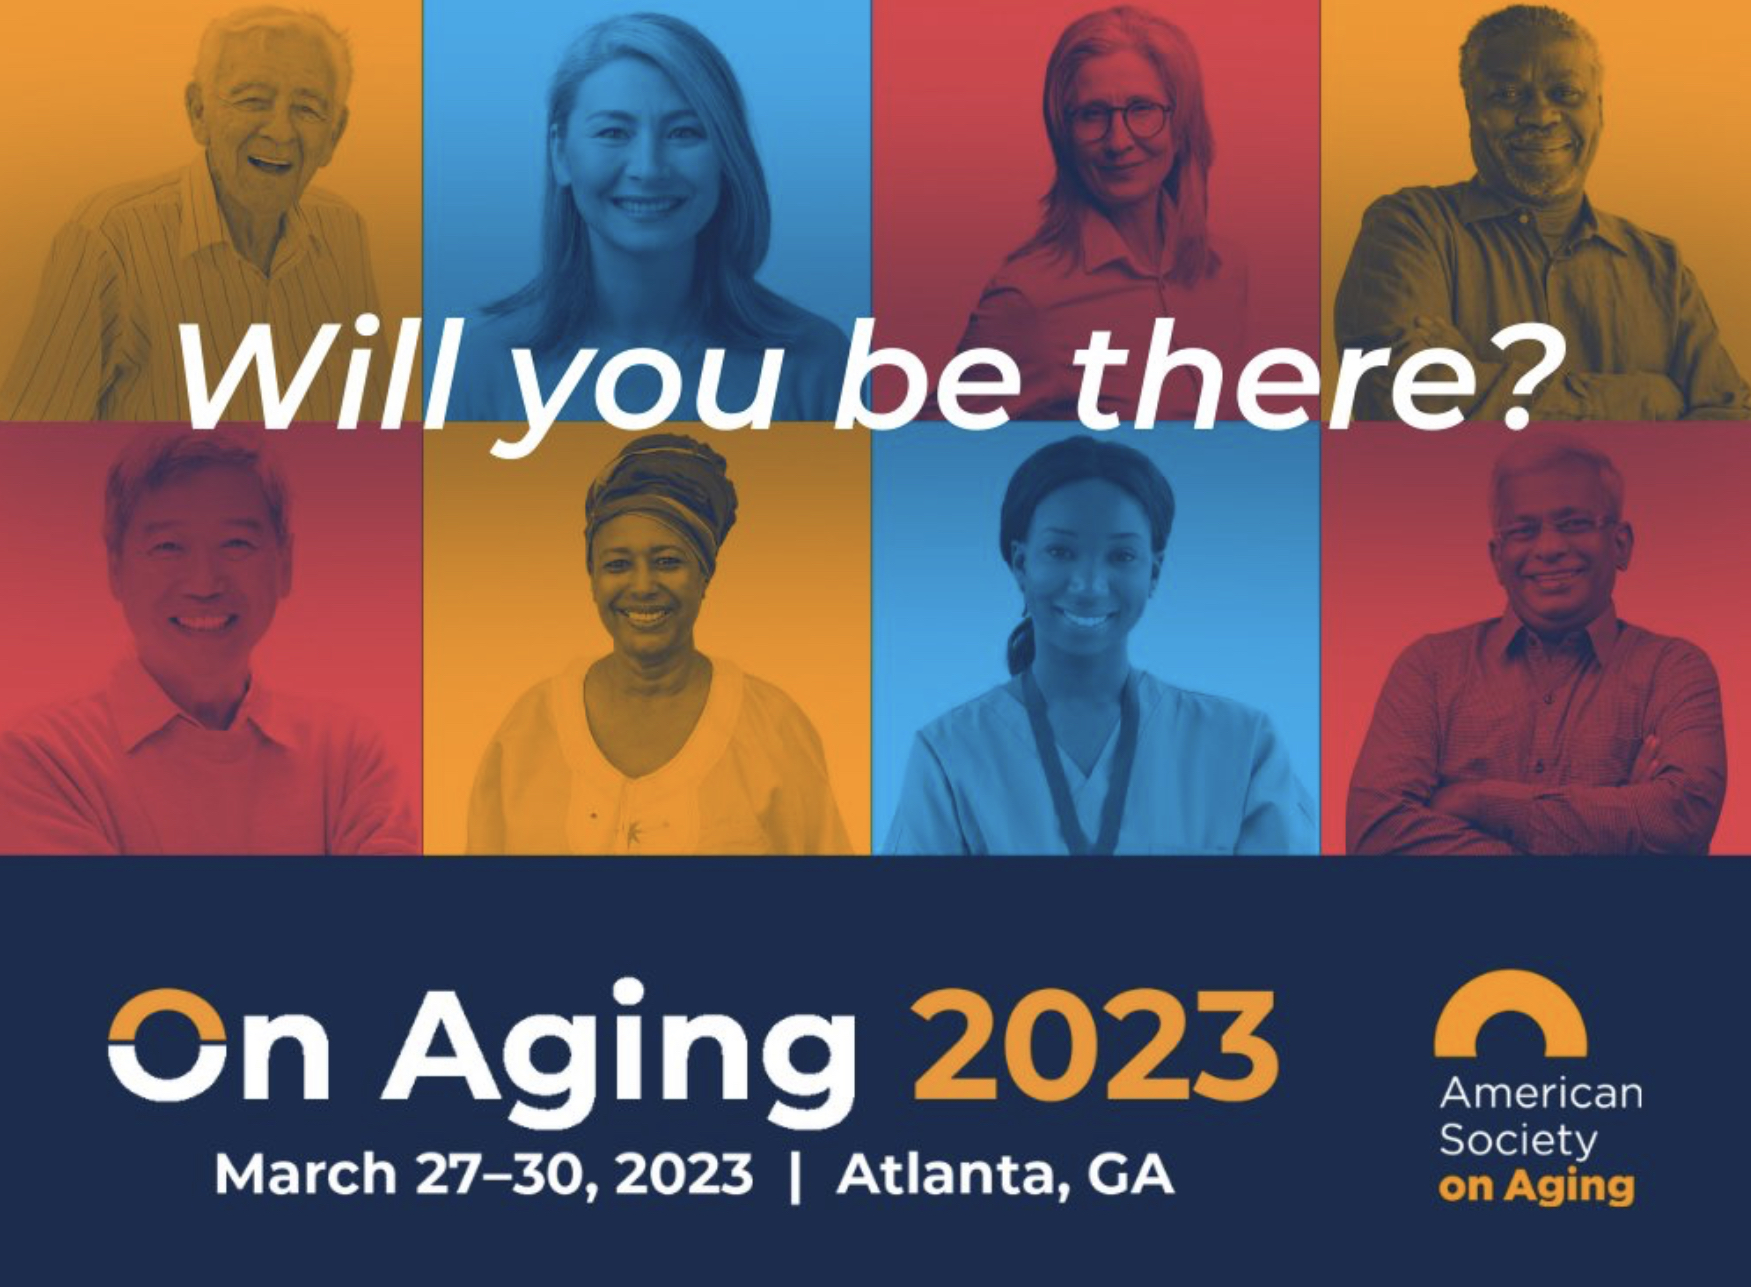 NAC at the American Society on Aging’s ‘On Aging’ 2023 Conference in